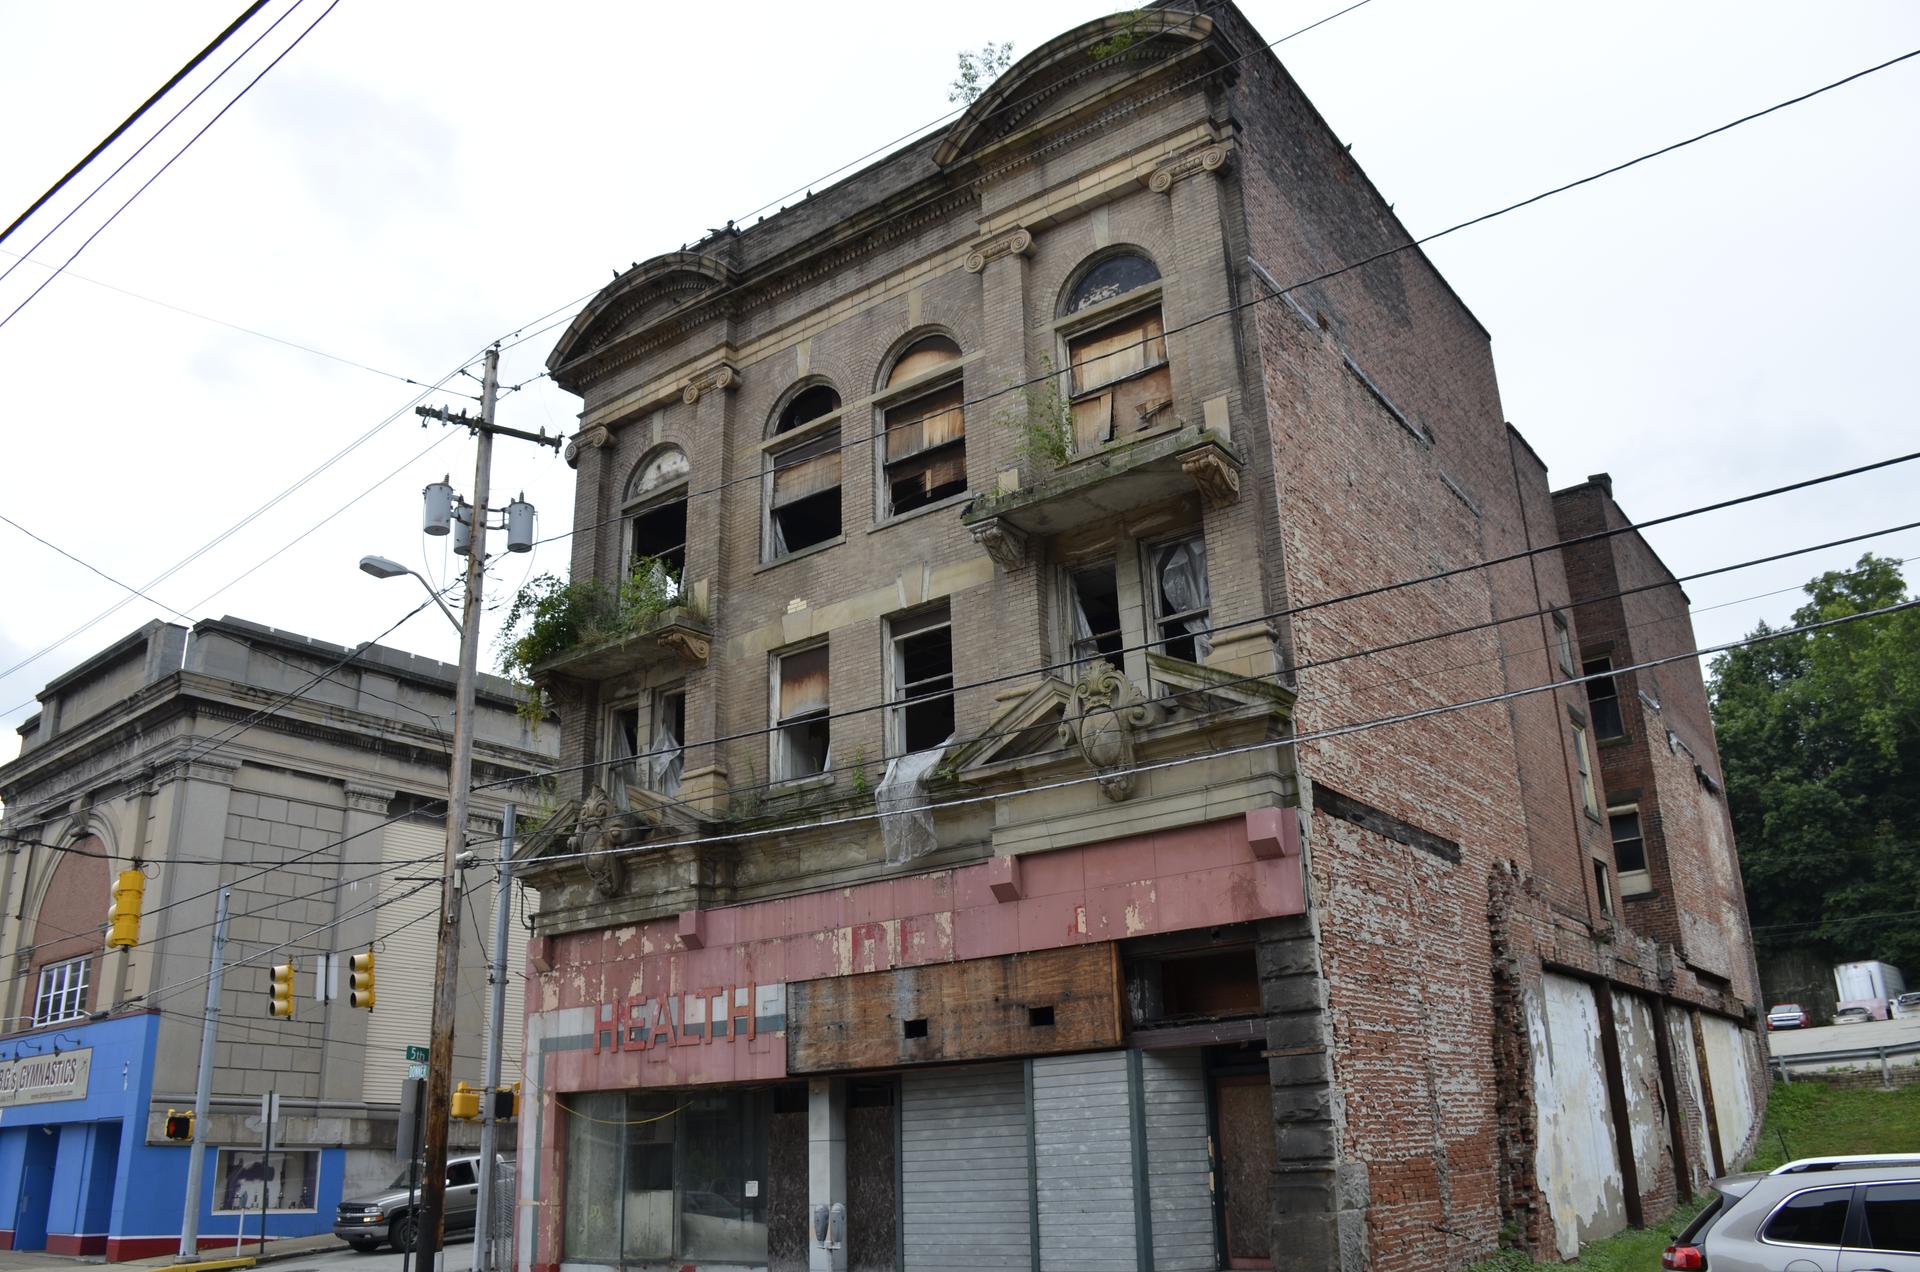 Downtown Monessen, PA. The city has 400 homes and 30 blighted buildings that need to be torn down.